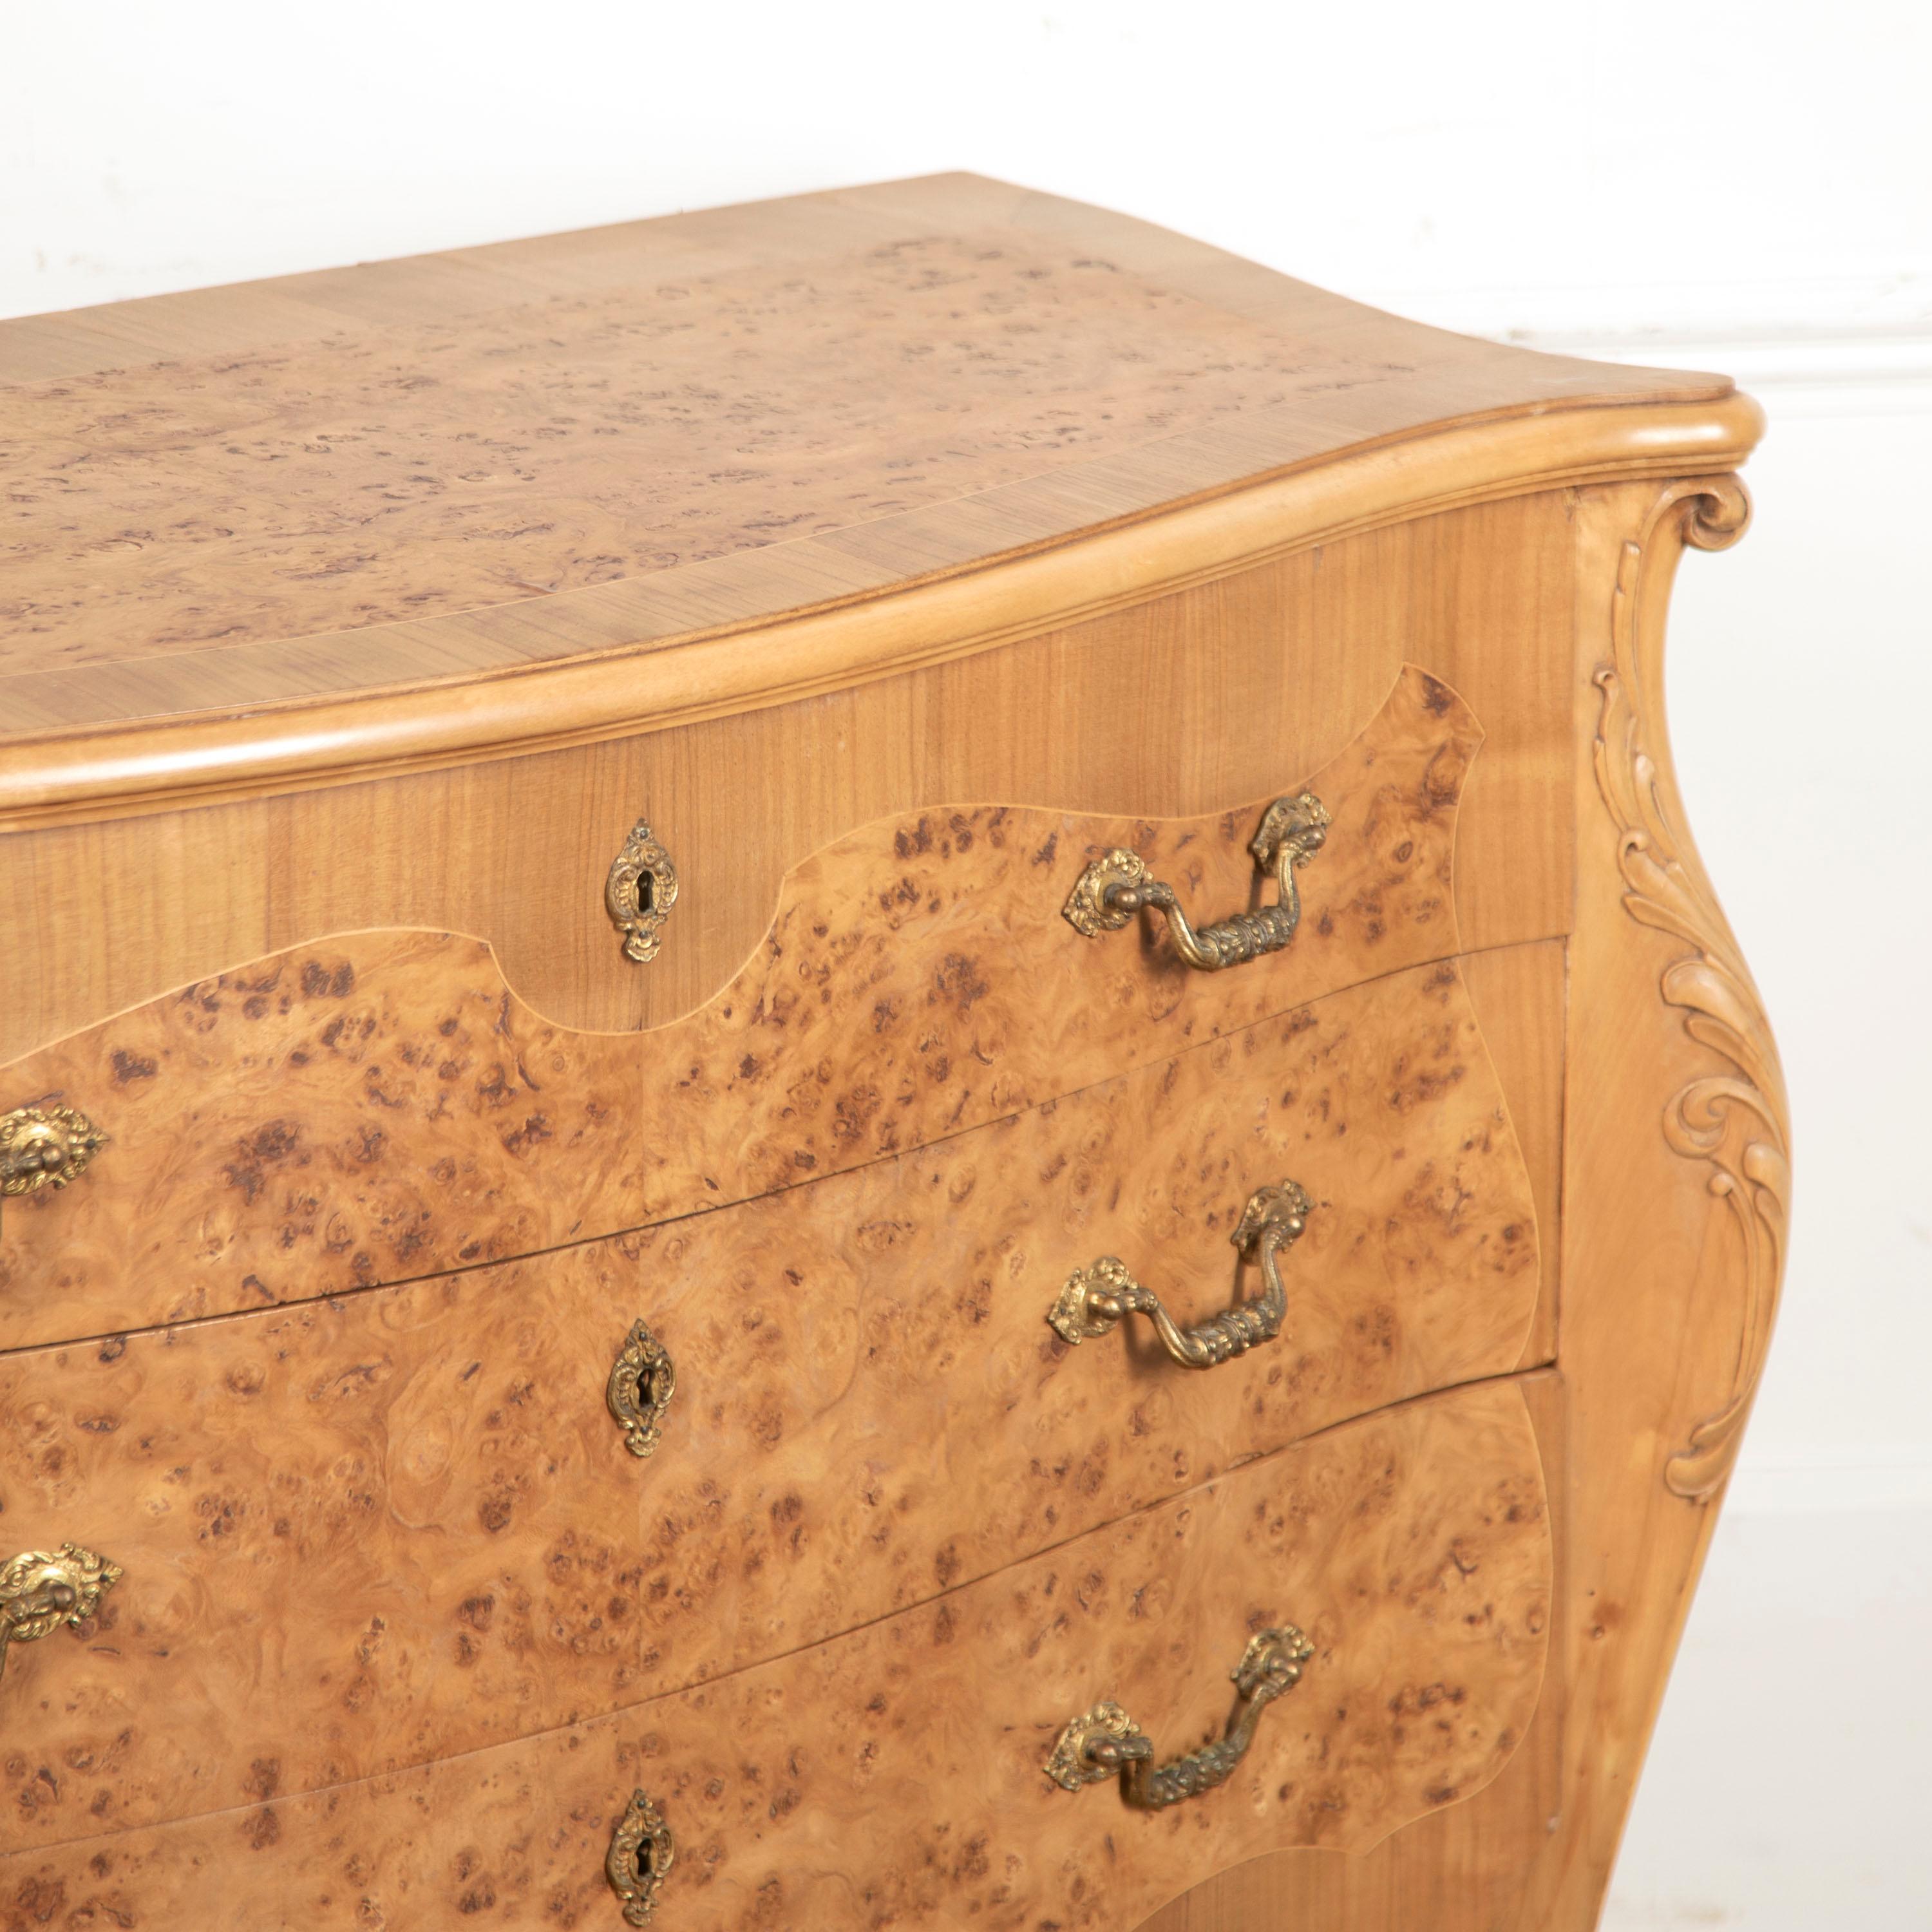 Pretty French burr walnut boule commode dating to the early 20th Century.

This commode has a fantastic form. It has stunning graining and colour throughout which are highlighted by the golden walnut undertones. 

The whole terminates onto